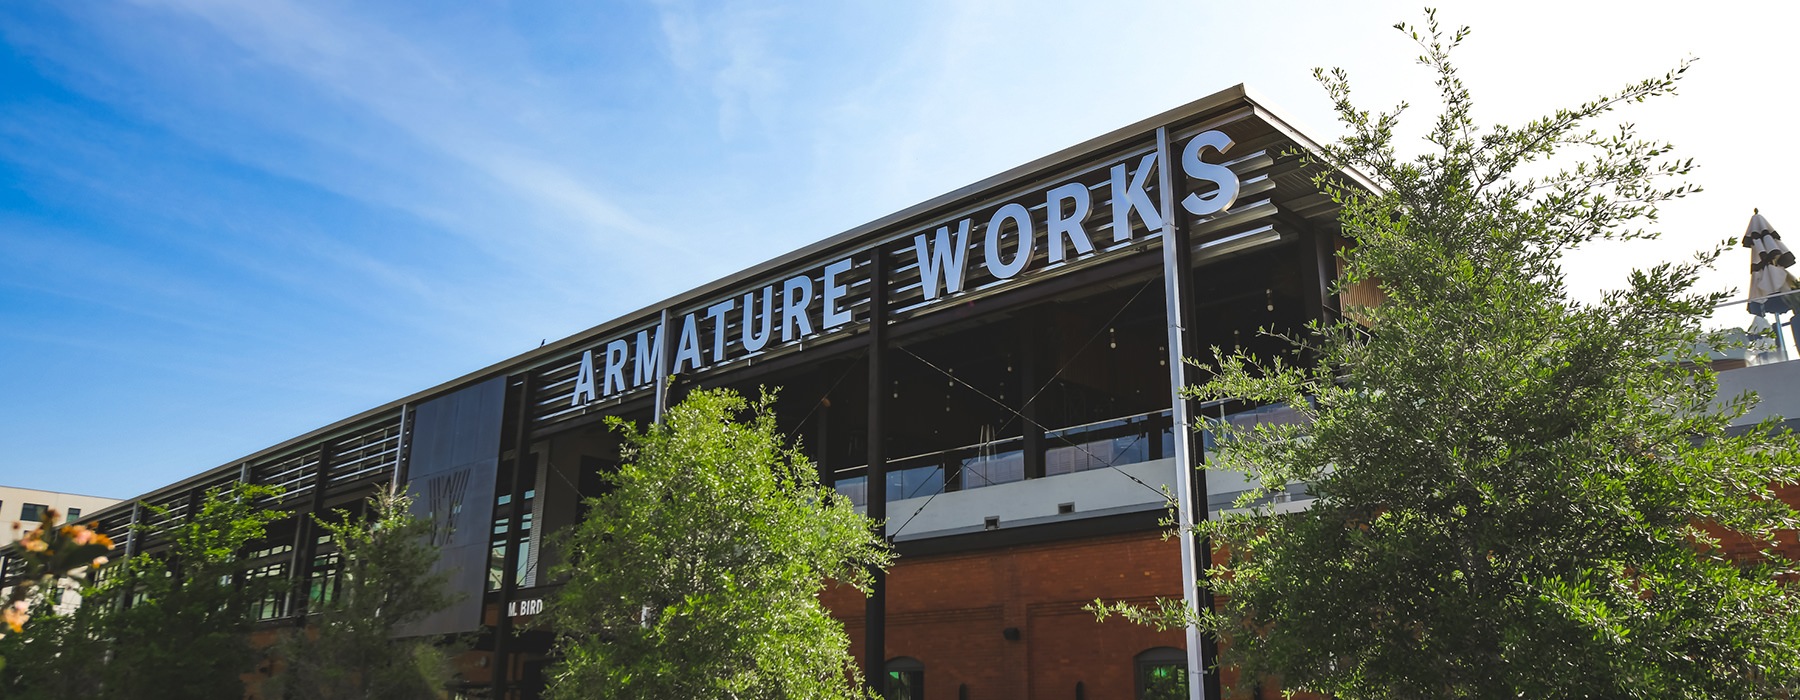 Exterior view of Armature Works 